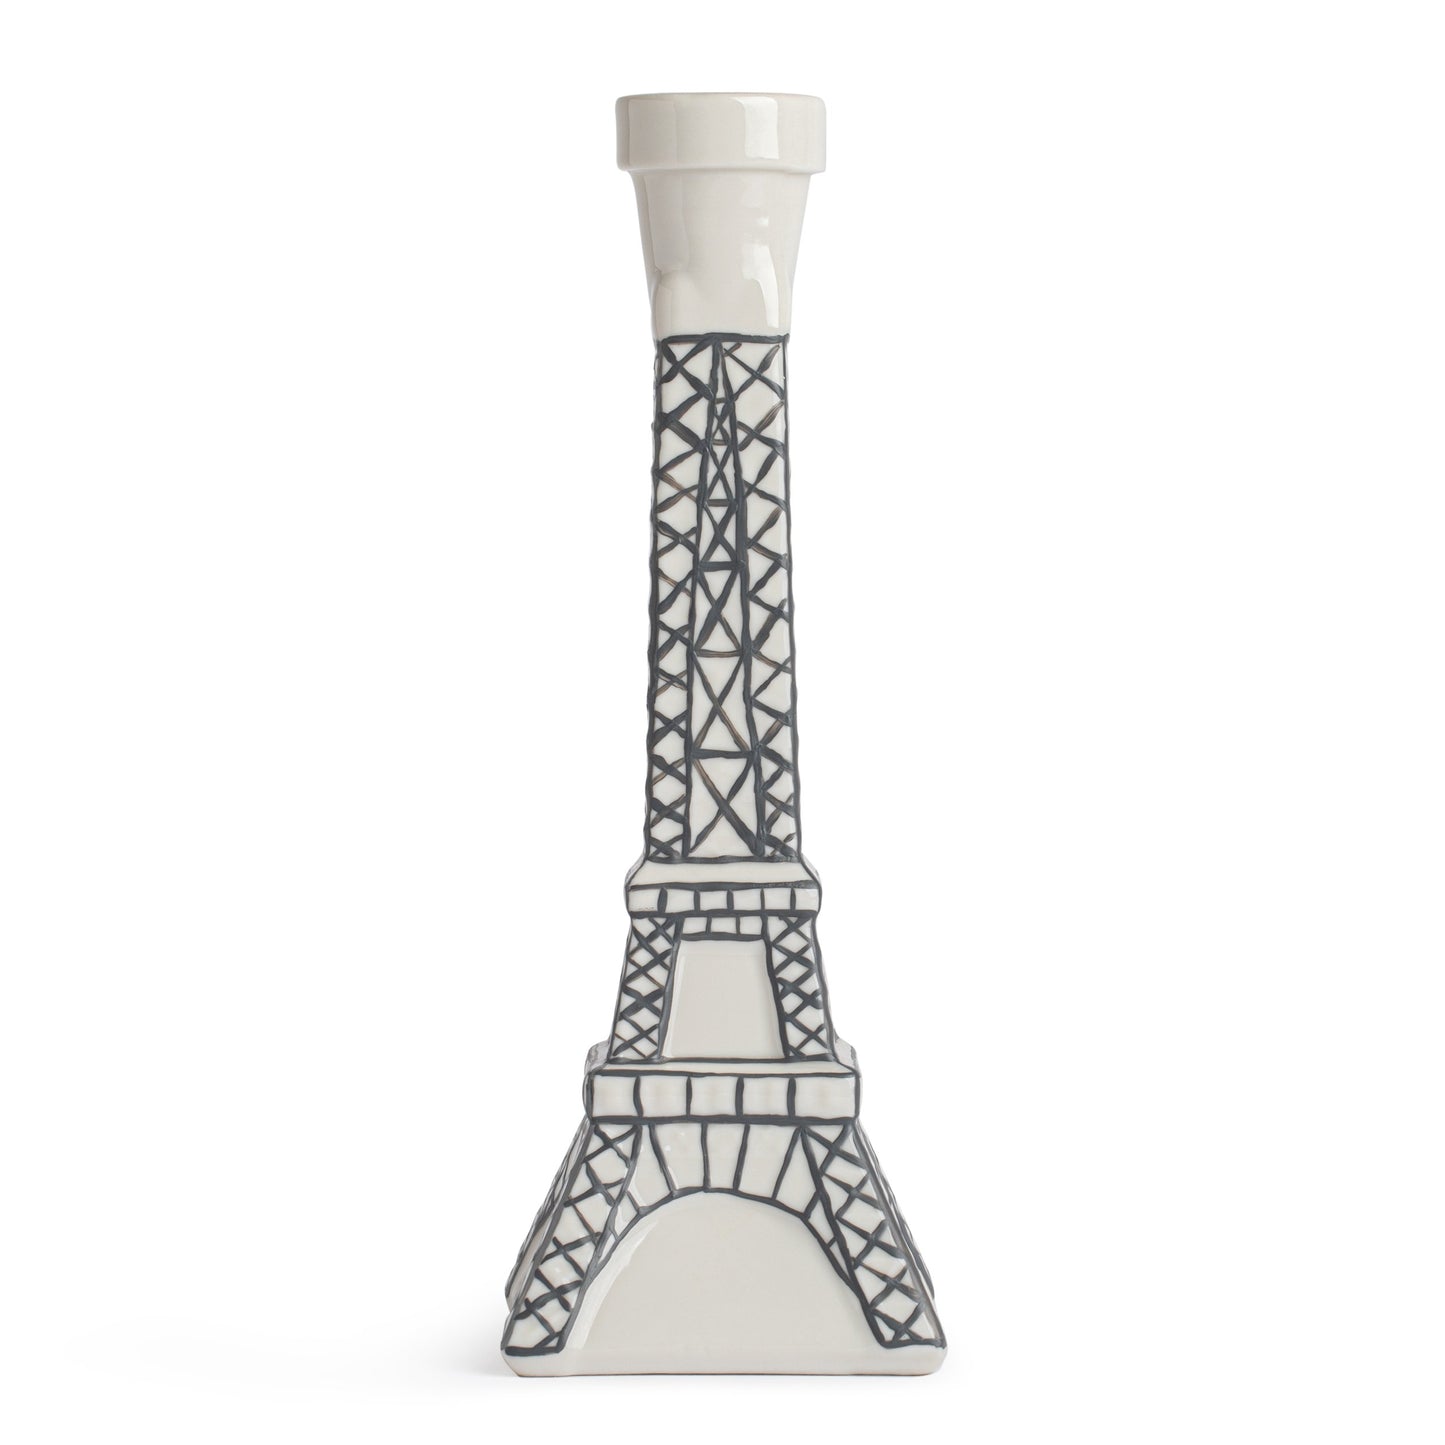 HAND PAINTED CANDLE HOLDER | EIFFEL TOWER